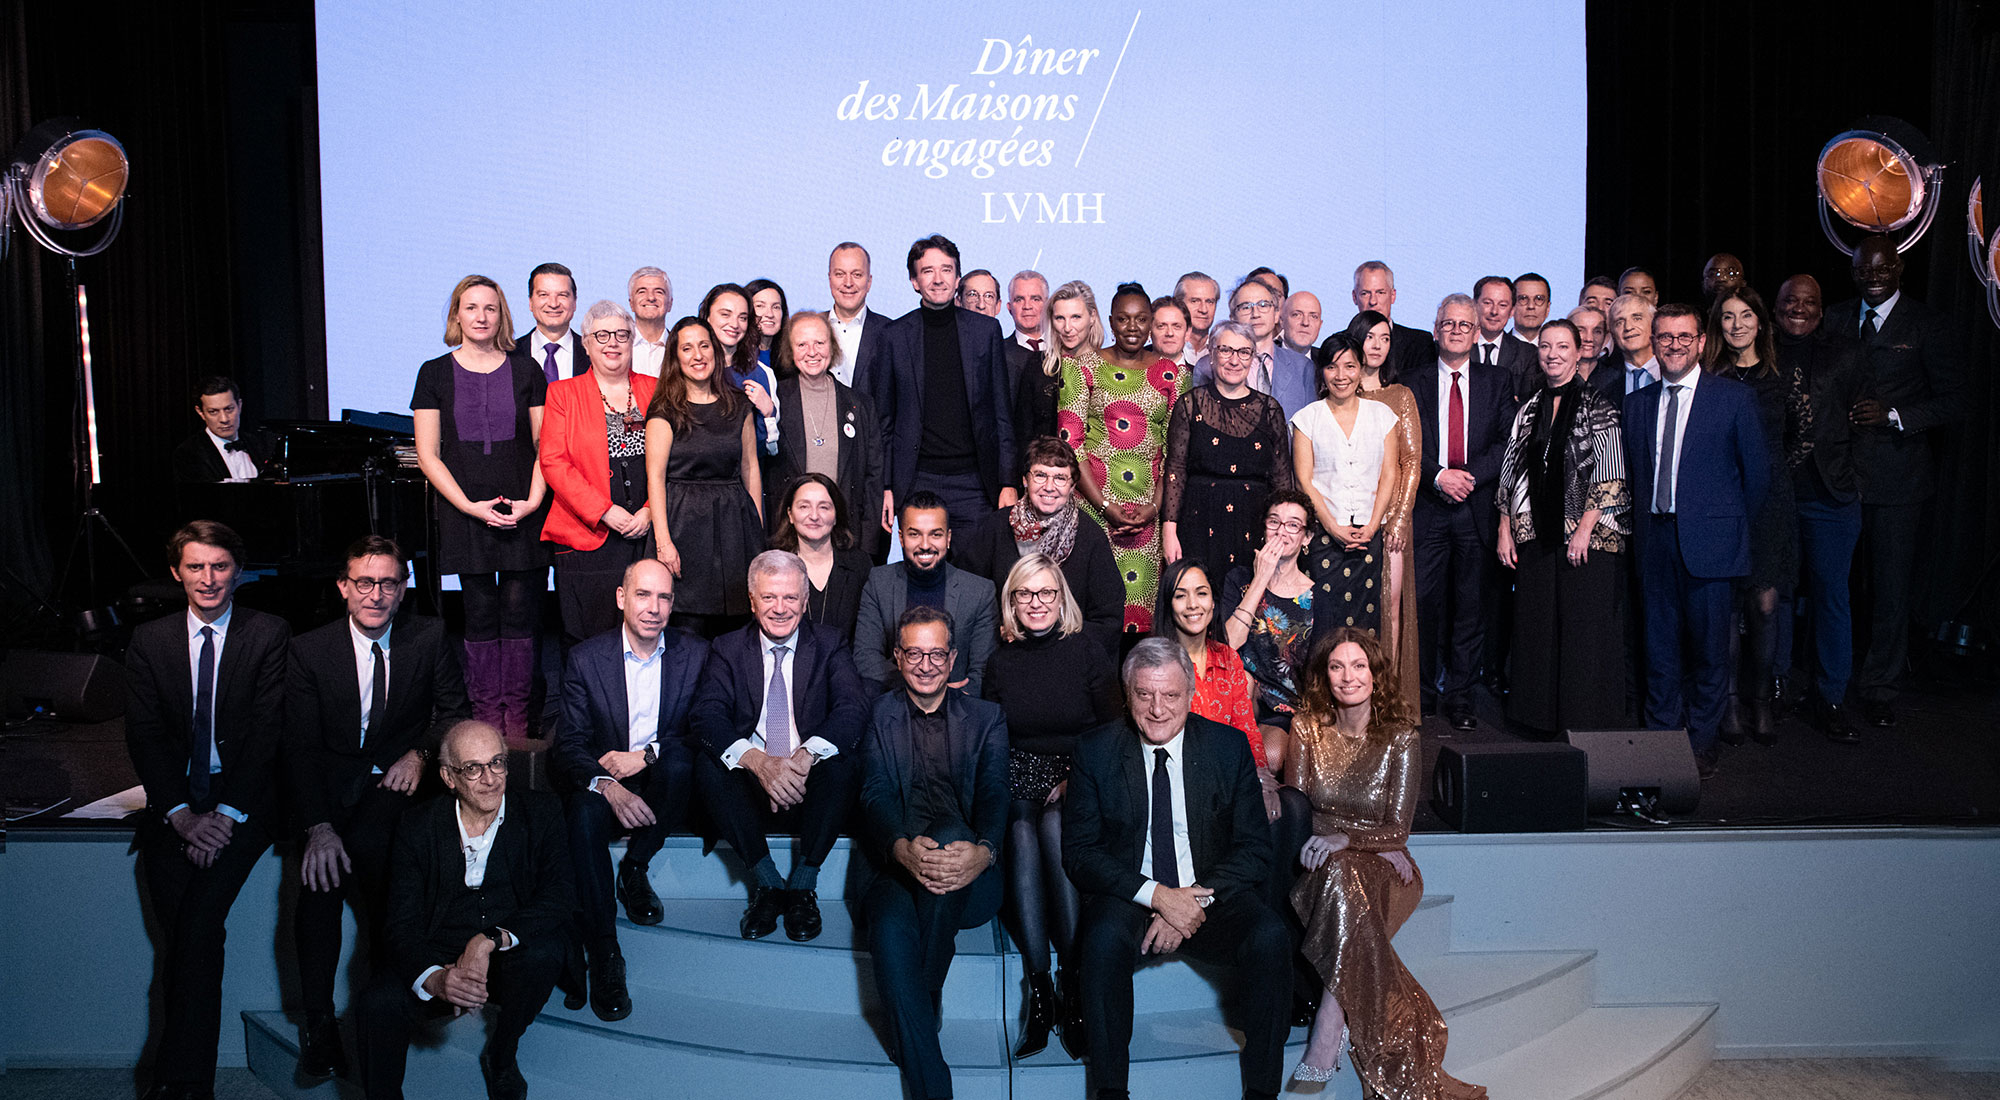 The LVMH Group and 30 Maisons reaffirm their social commitment for